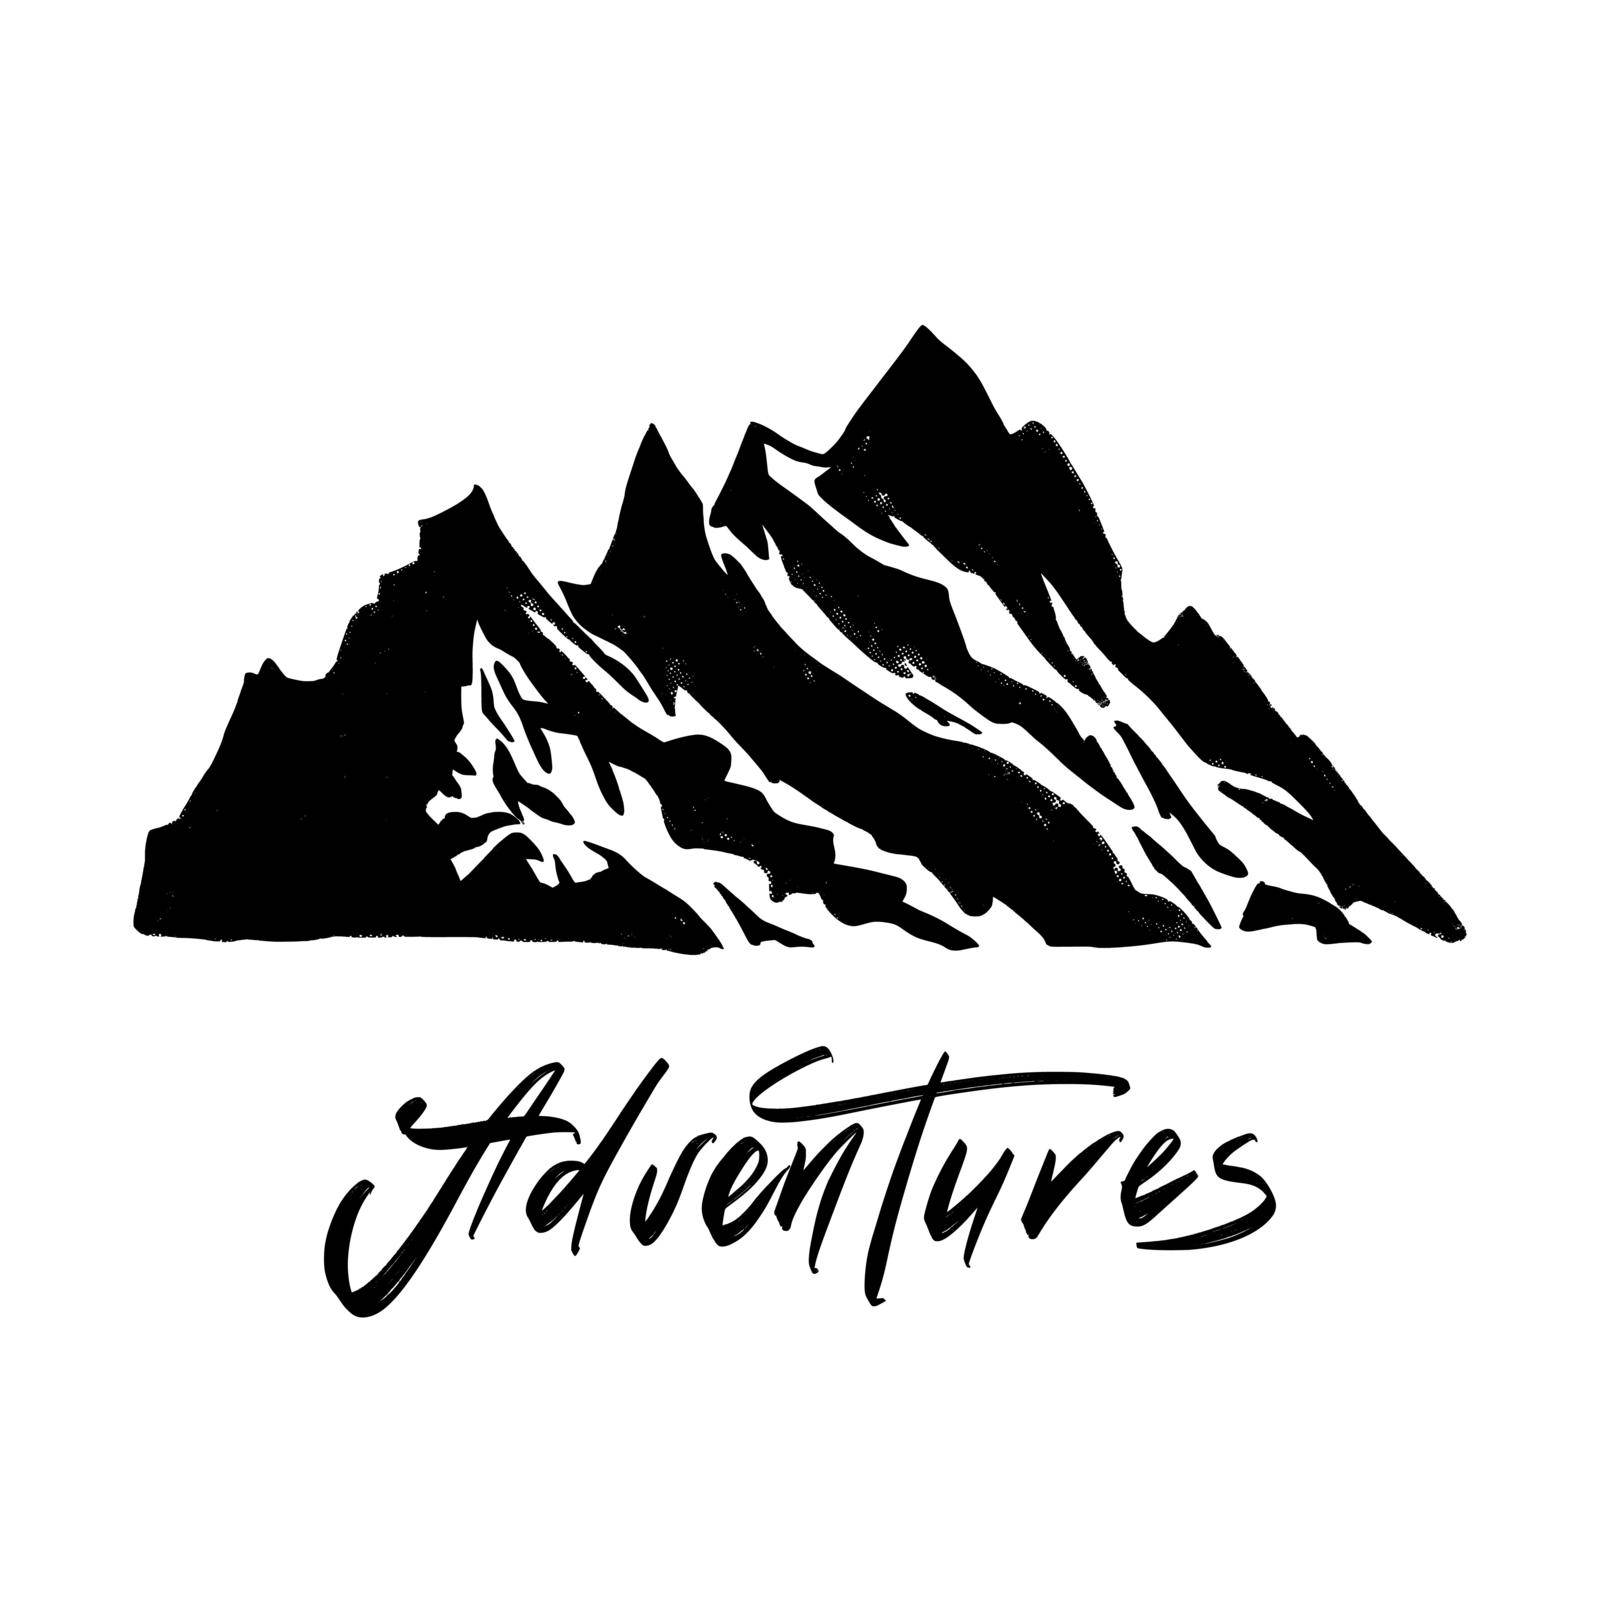 Hello New Adventures hand drawn grunge t-shirt print with mountains. Hiking and travelling vintage badge. by iliris